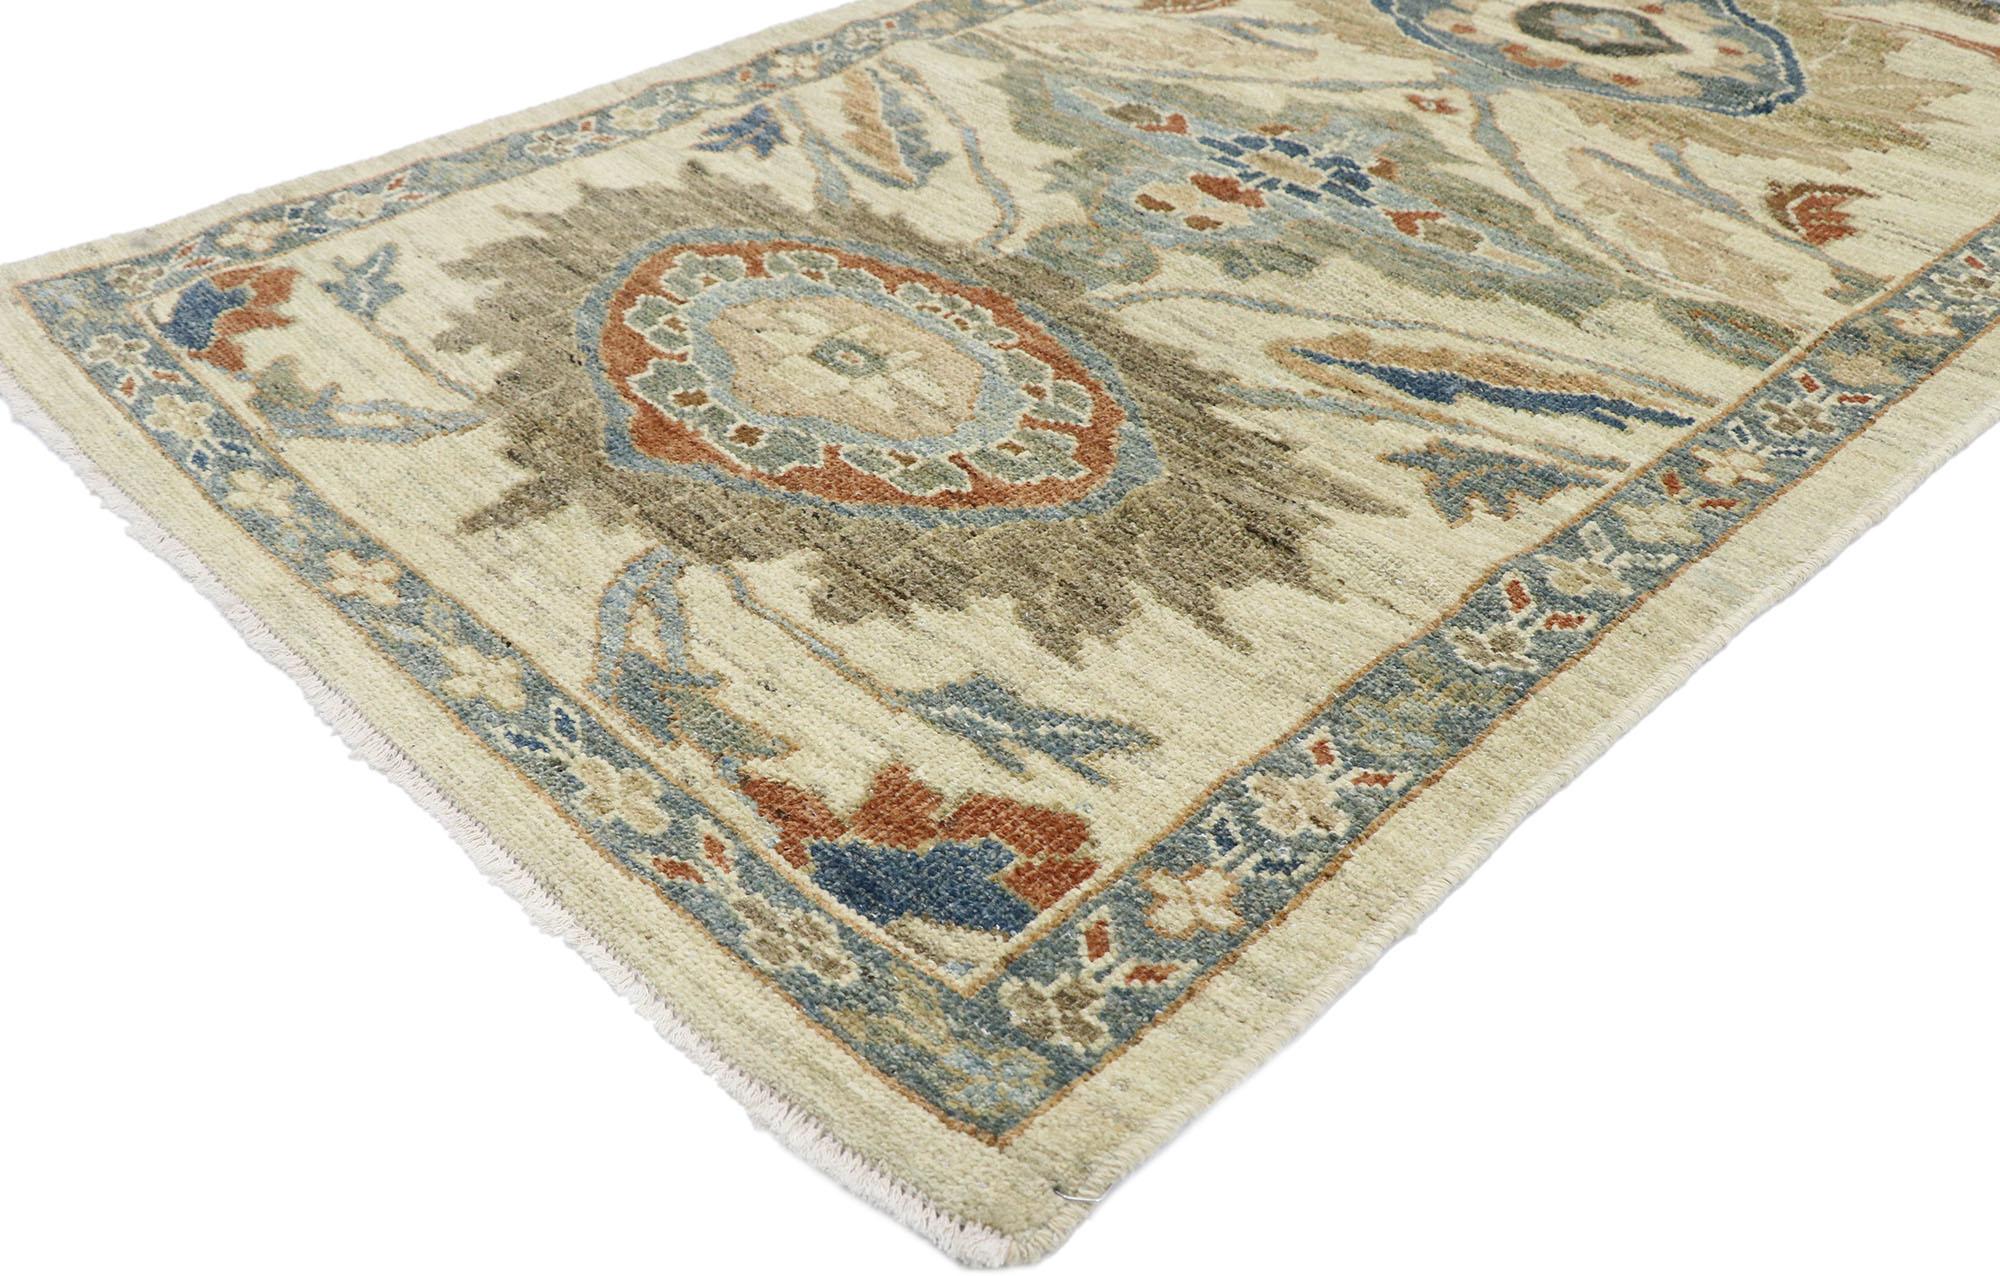 60904 New Contemporary Persian Sultanabad runner with Modern Transitional Style 03'05 x 18'04. This hand-knotted wool contemporary Persian Sultanabad carpet runner features an all-over botanical pattern spread across an abrashed tan striated field.